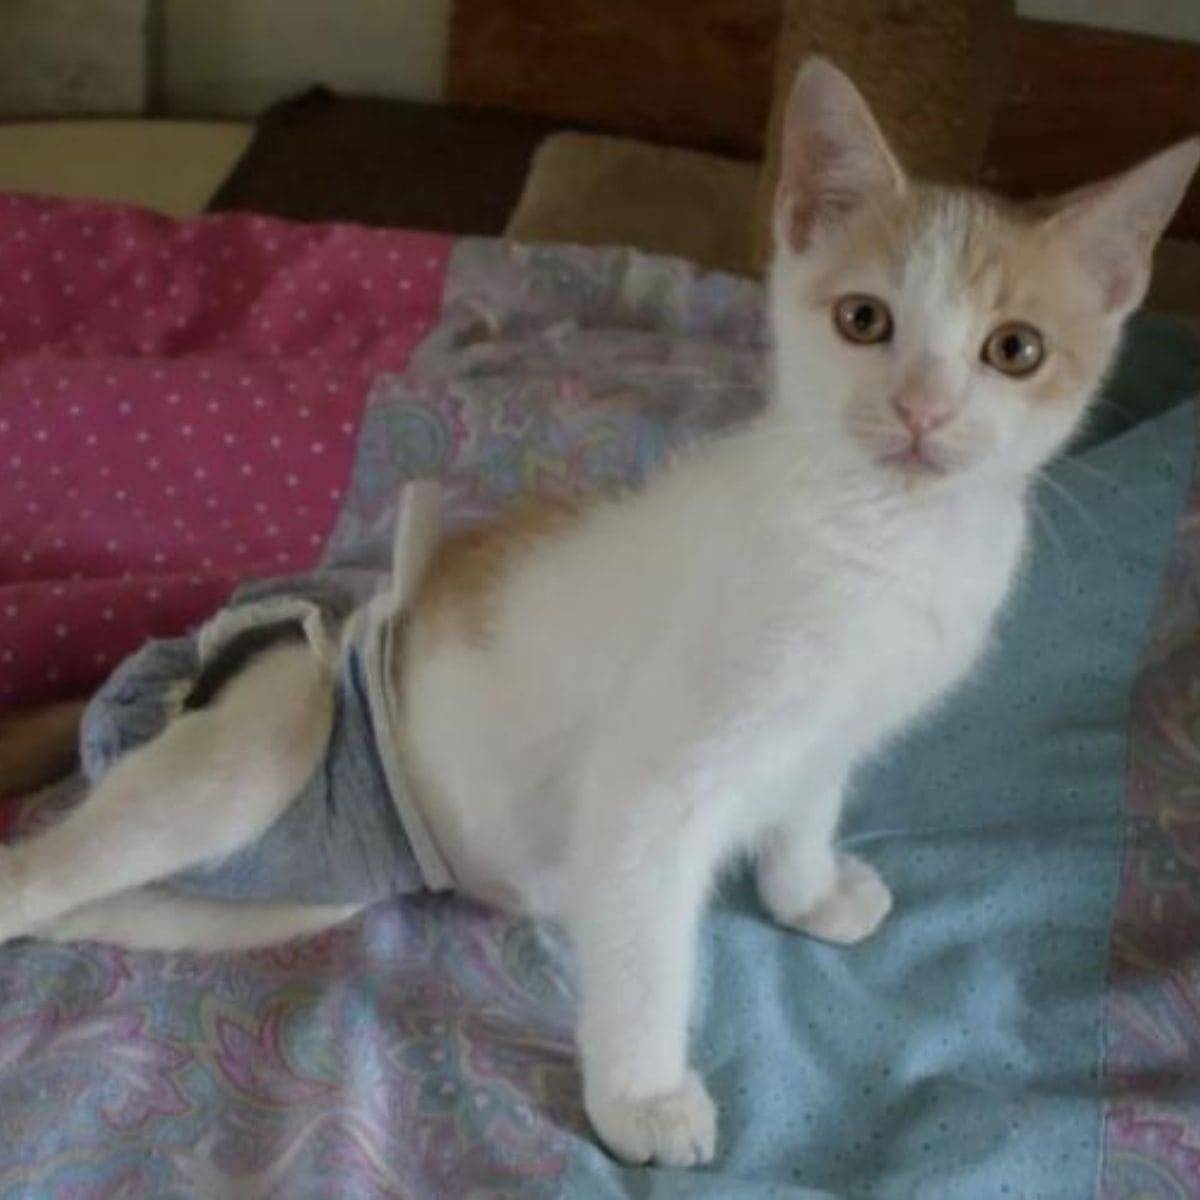 Paralyzed Kitten on the bed